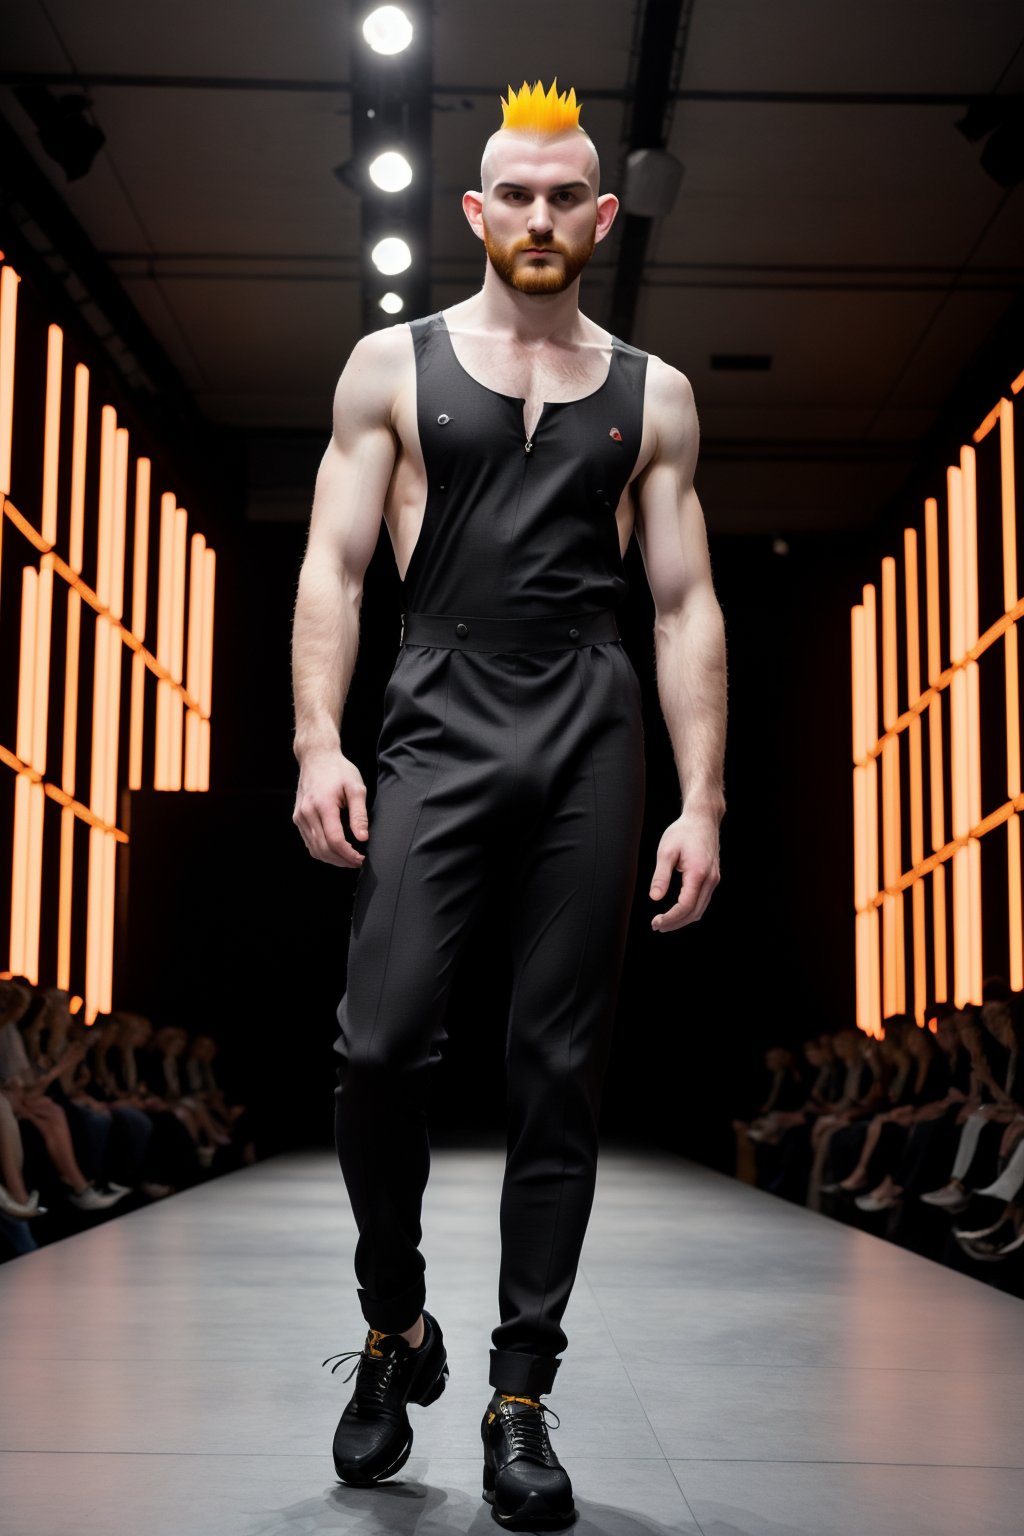 Tall, pale slender male model stands confidently on the catwalk, striking an intense pose. He wears well-rendered post-modern malewear, including bold patterns and textures, paired with statement-making male footwear. His ginger faux-mohawk hairstyle adds a touch of edginess to his overall look. A softglow effect illuminates his features, emphasizing the intricate details of his outfit. The camera captures him in full-height, showcasing his dramatic pose amidst the vibrant atmosphere of the high-fashion show.